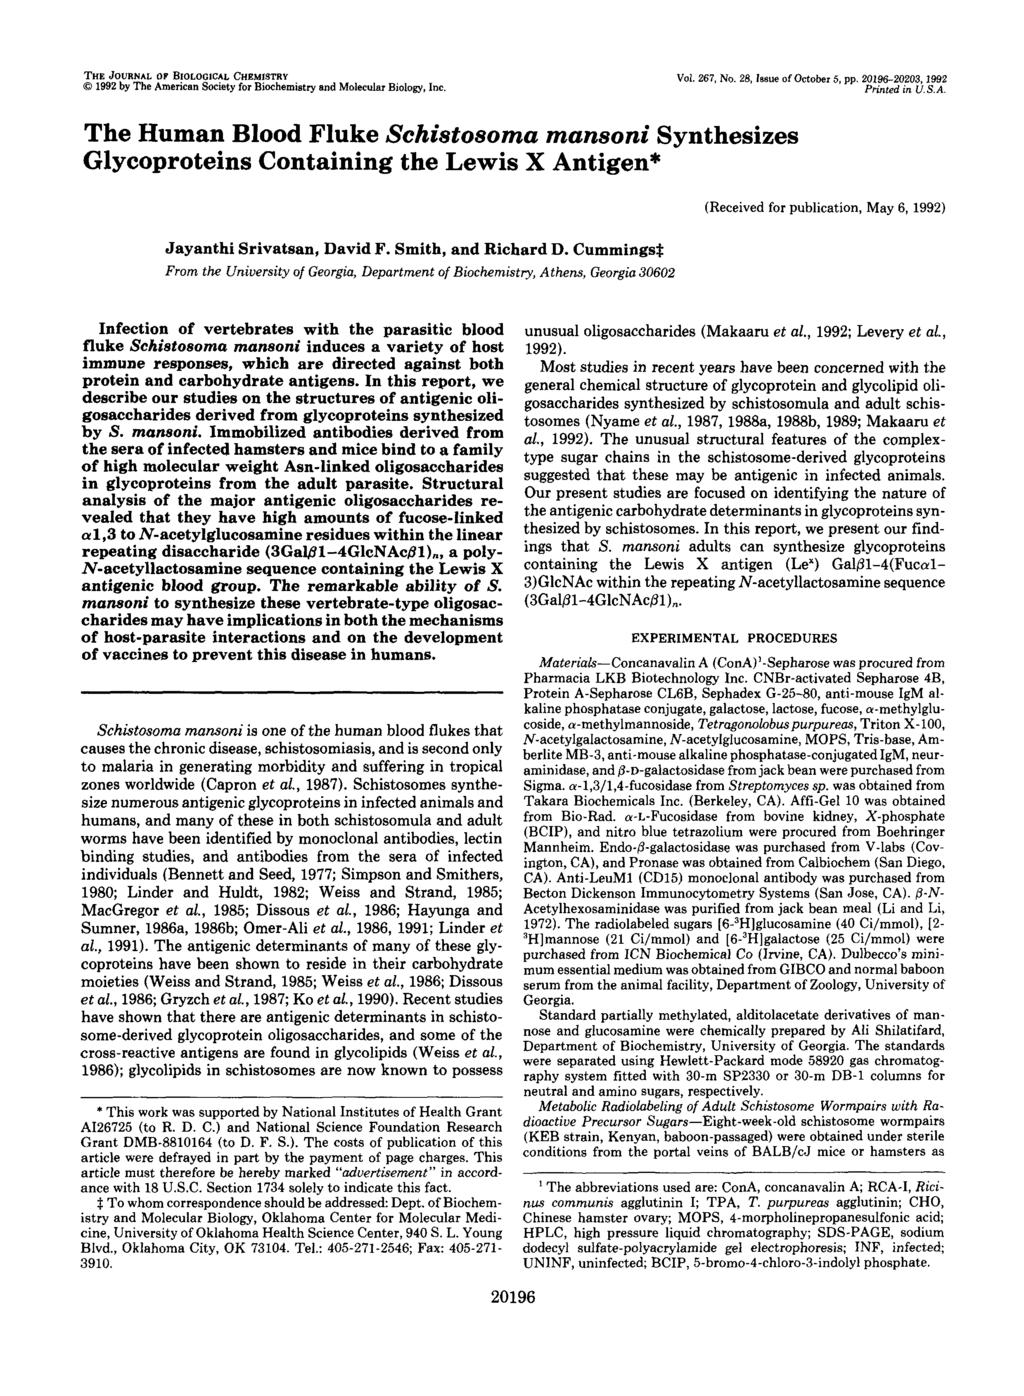 THE JOURNAL OF BIOLOGICAL CHEMISTRY 1992 by The American Society for Biochemistry and Molecular Biolopy, Inc. Vol. 267, No. 28, lrrsue of October 5, pp. 2196-223, 1992 Printed in U.S.A. The Human Blood Fluke Schistosoma mansoni Synthesizes Glycoproteins Containing the Lewis X Antigen* Jayanthi Srivatsan, David F.